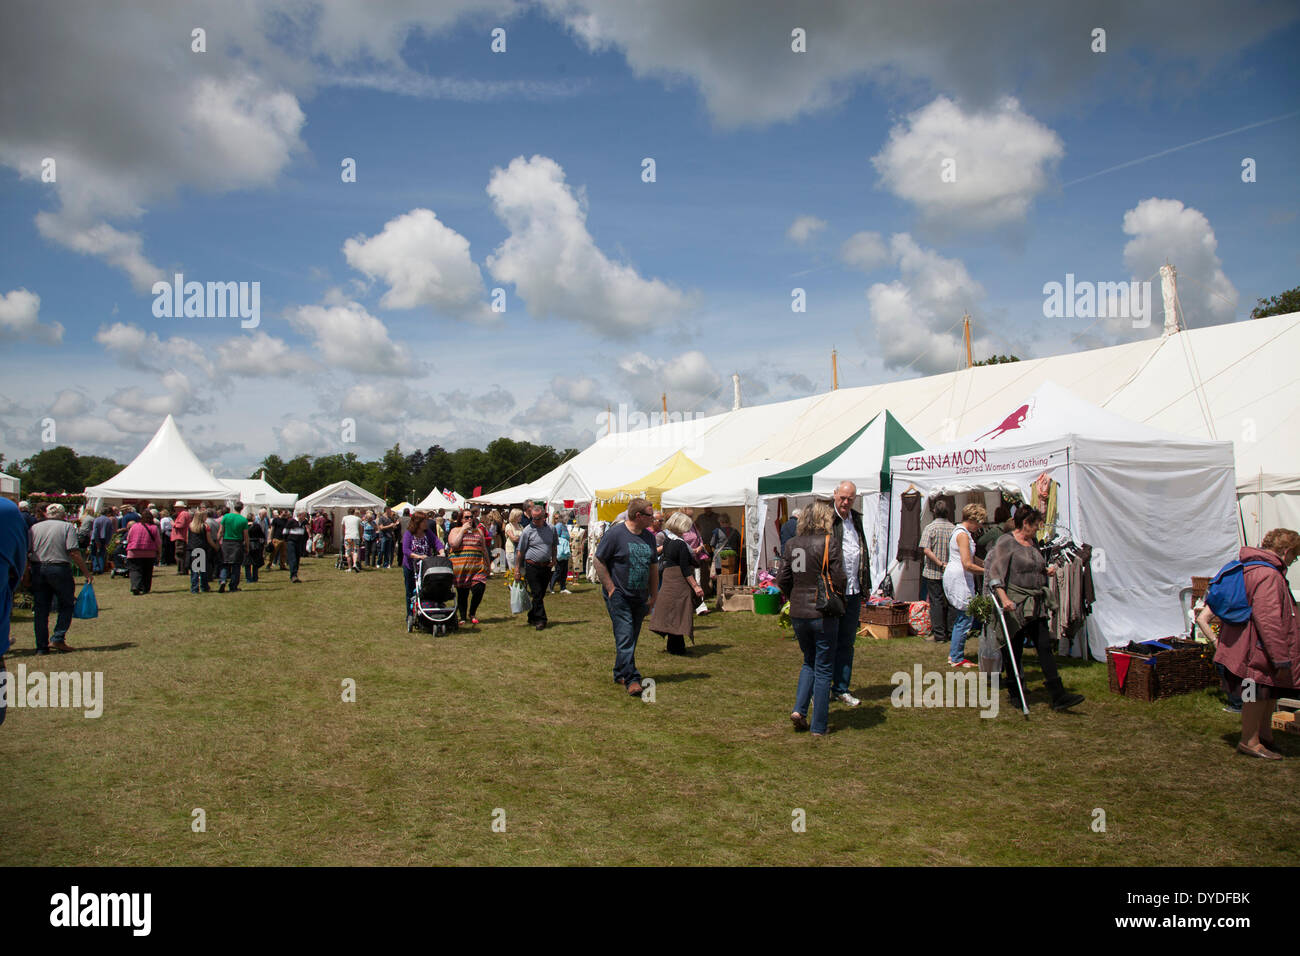 Visitors at country show outside marquees. Stock Photo